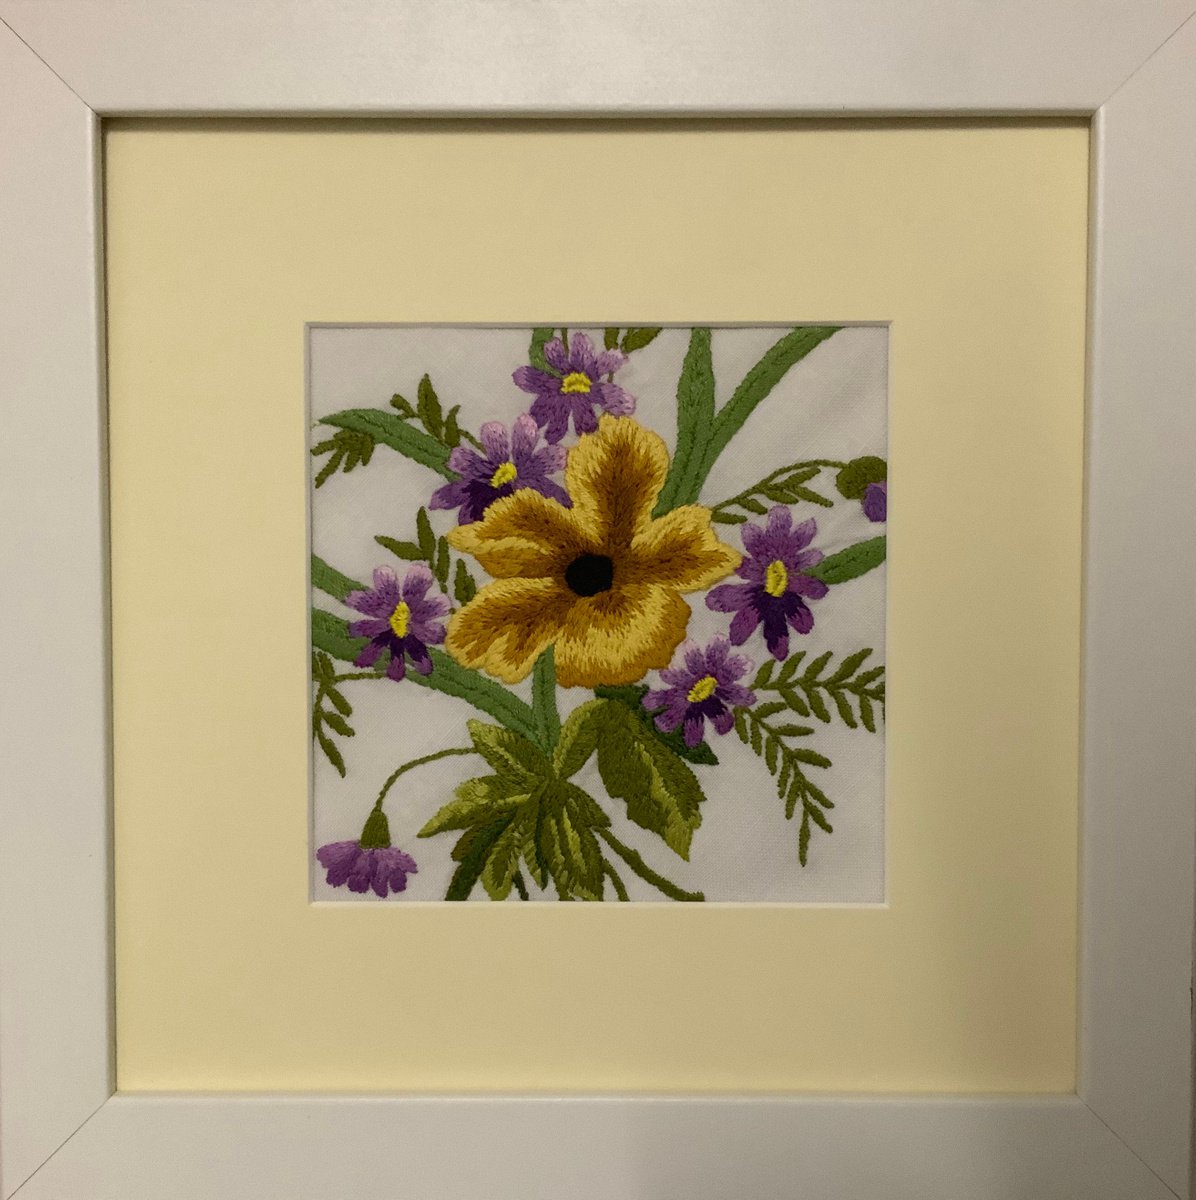 A late summer bouquet - framed 1930s Vintage Hand embroidery - floral art by Sarah Gill